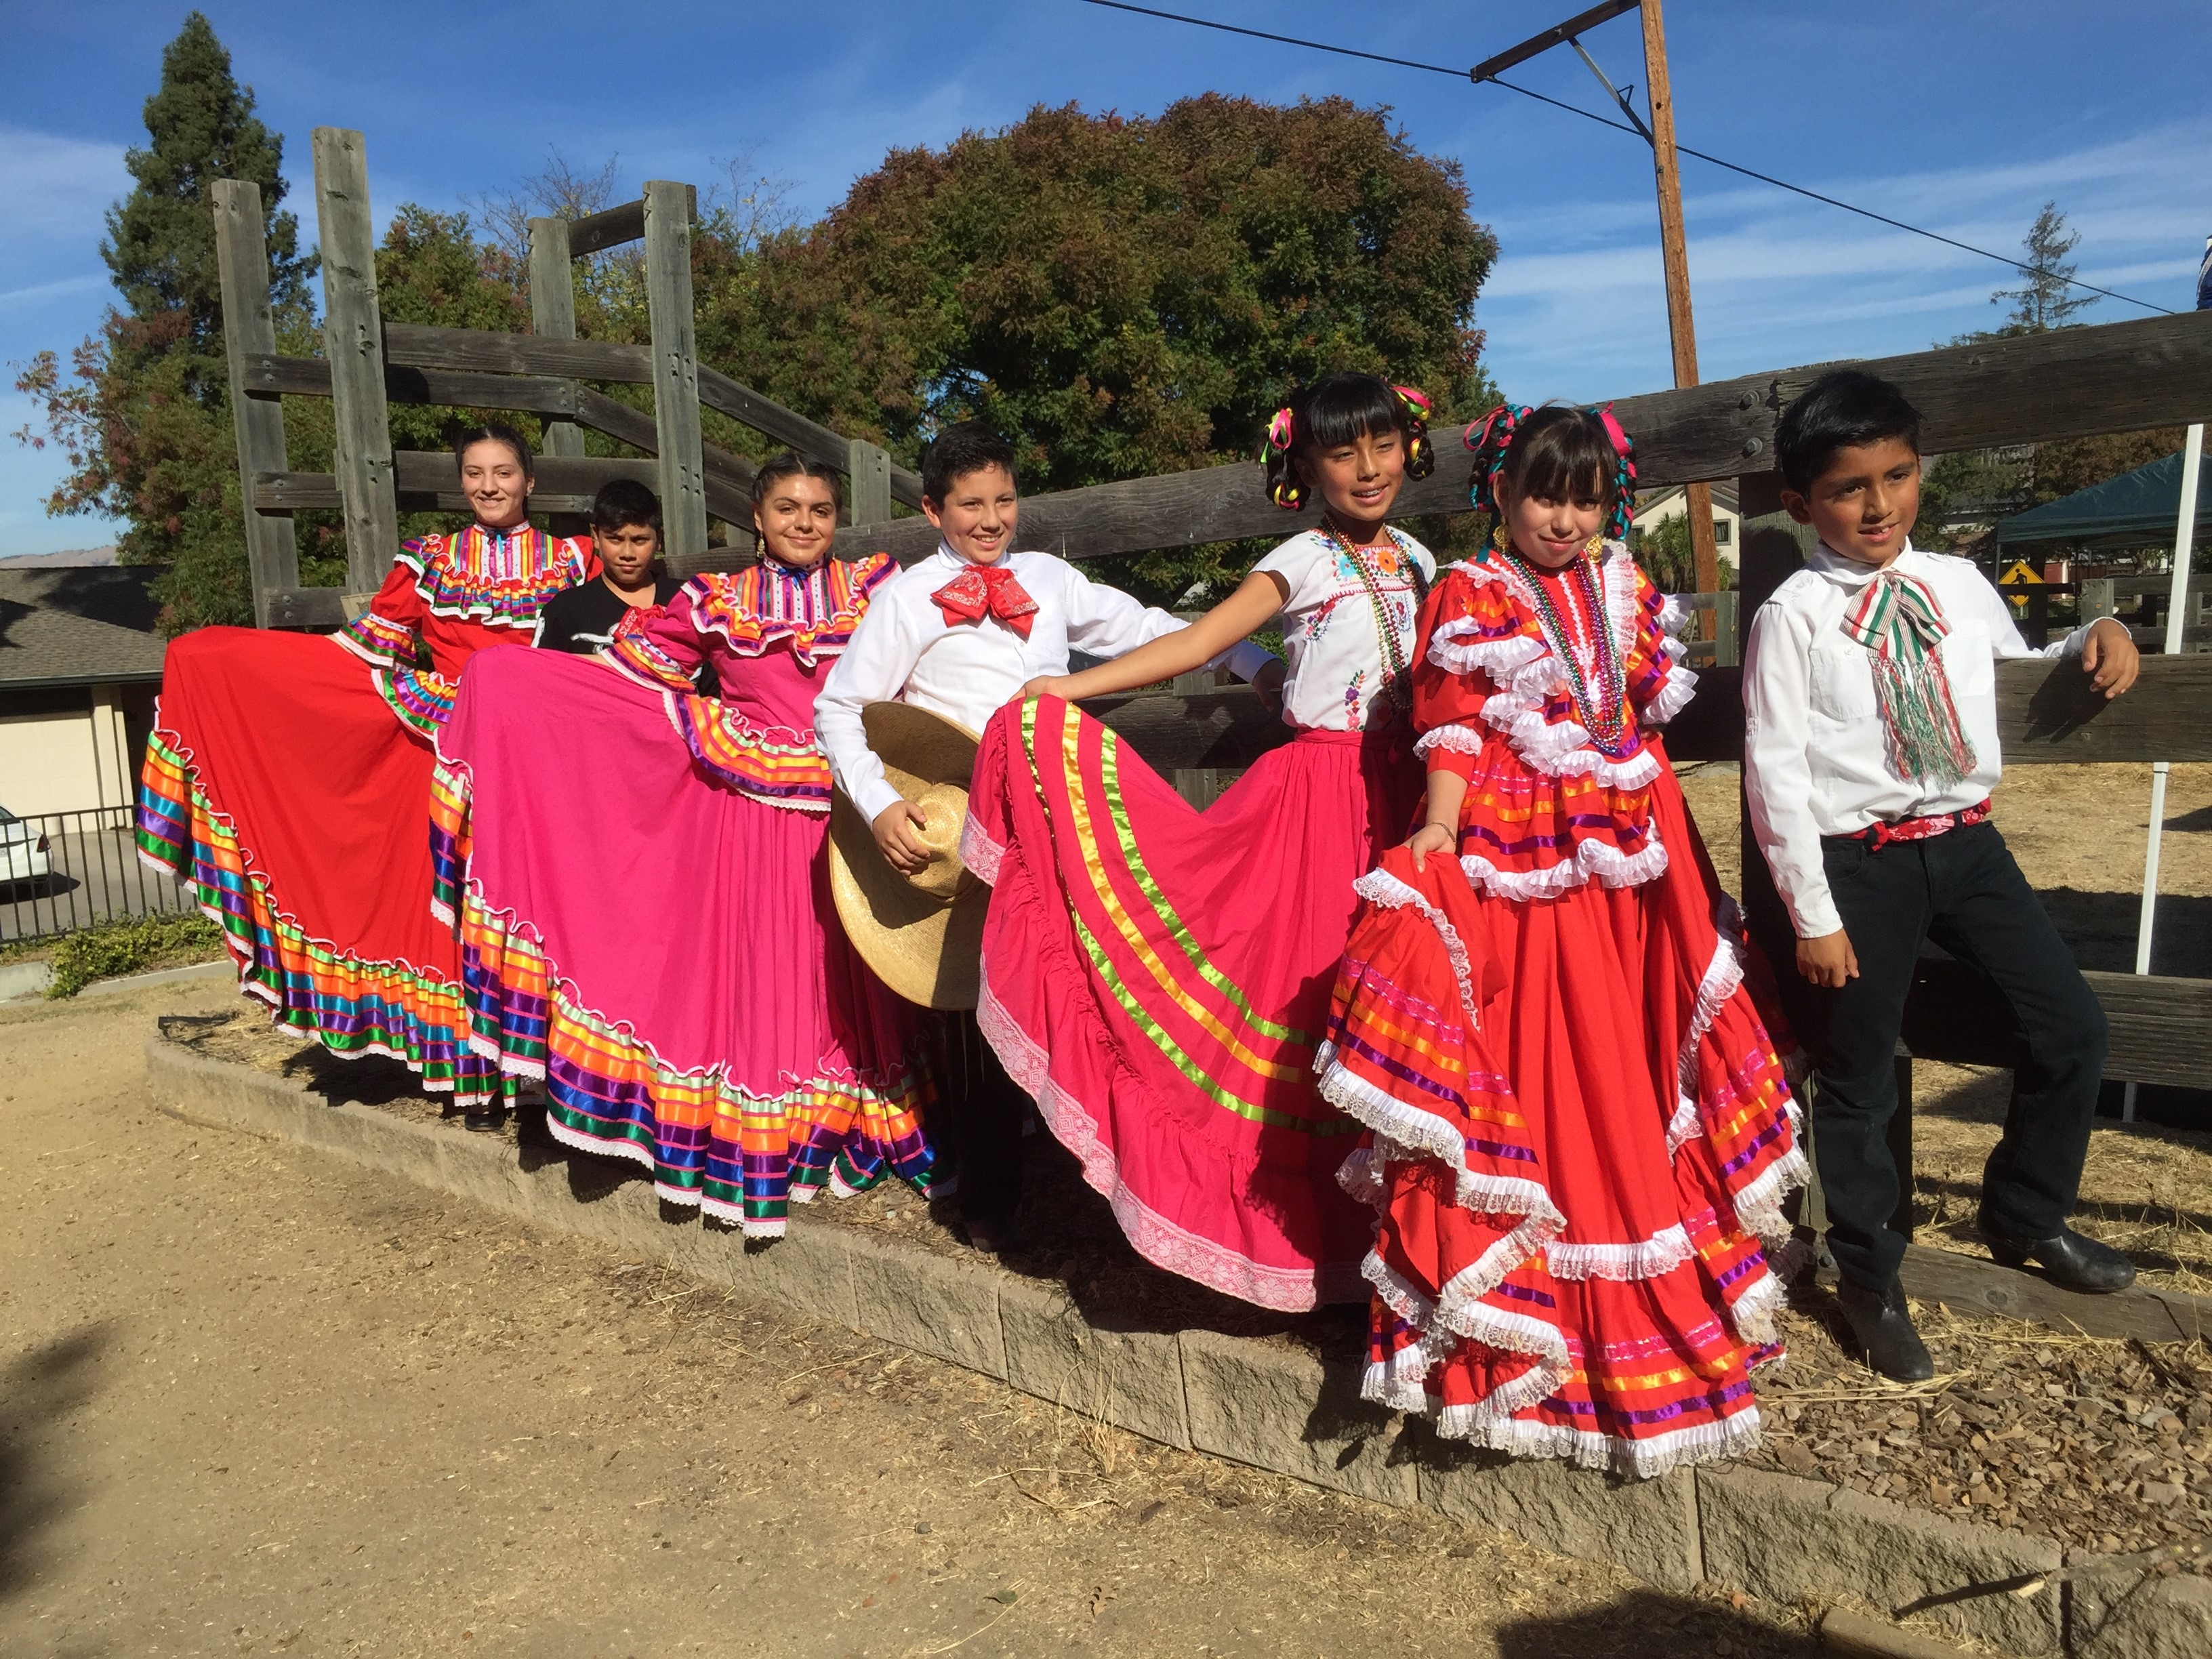 Dancers from the group El Grito de Cultura pose for a photo